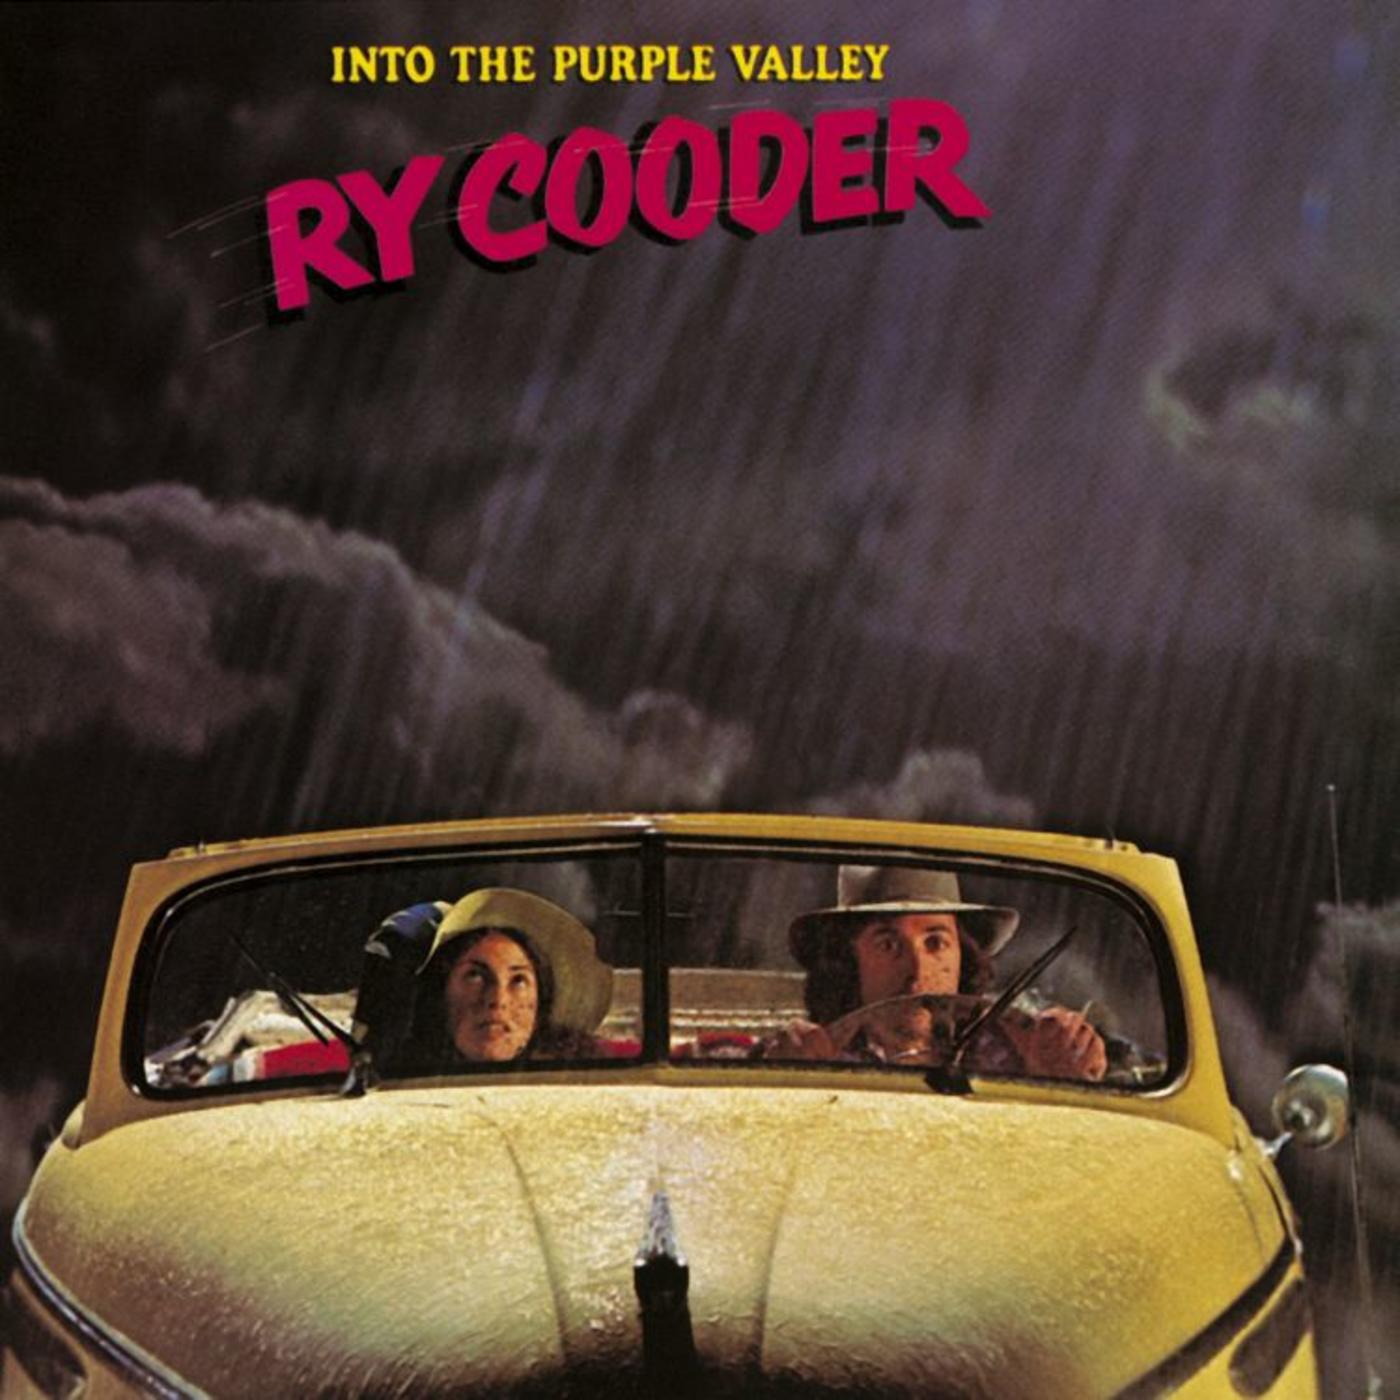 Ry Cooder - Complete Albums 1970-1987 | Rhino